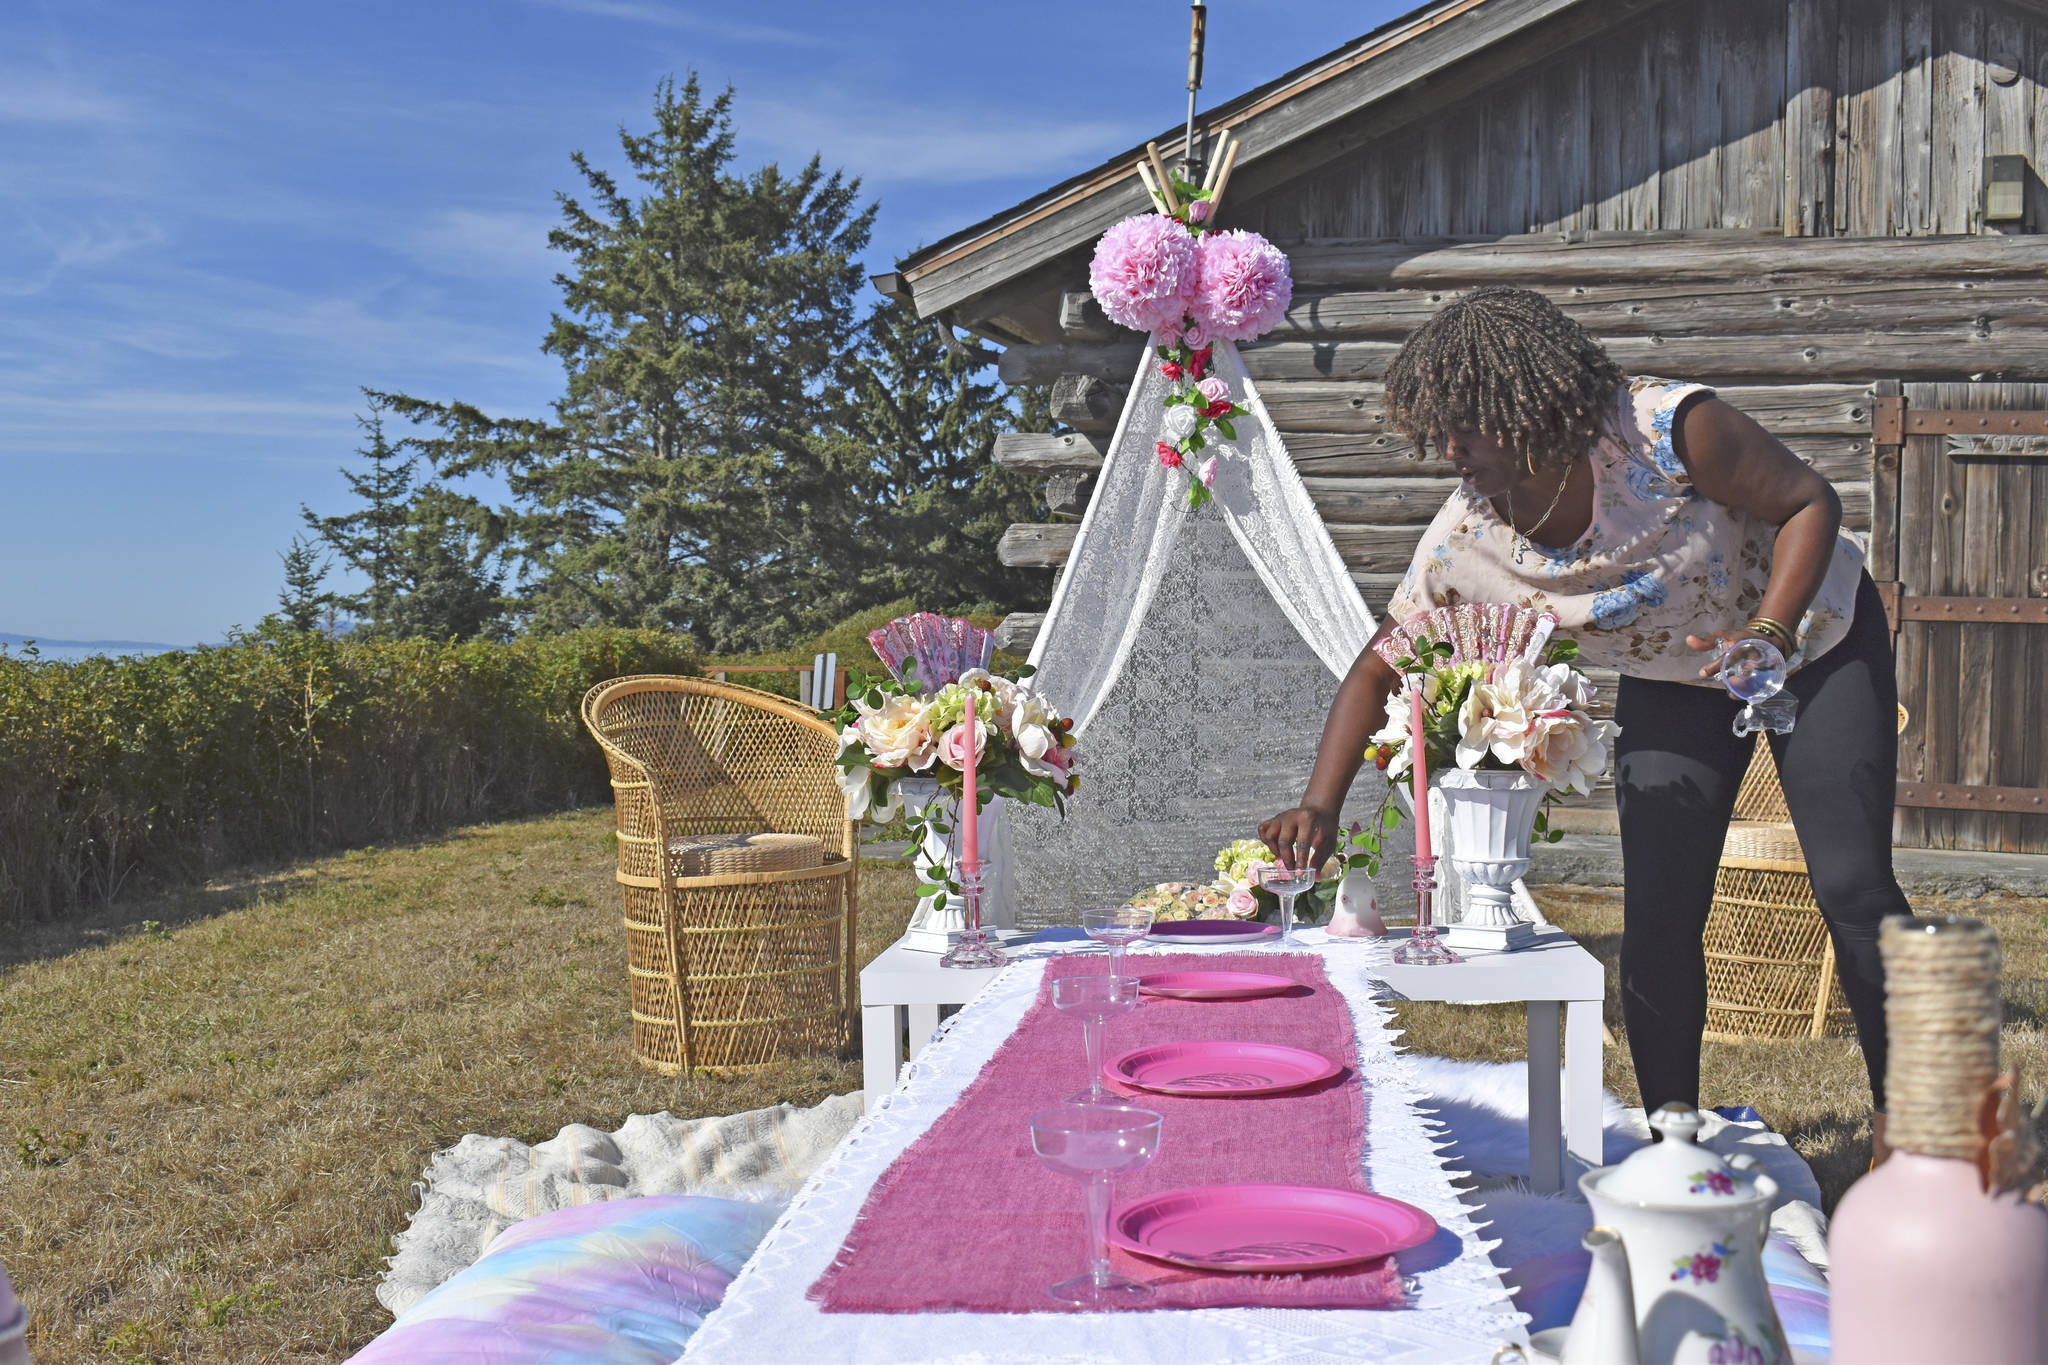 <p>Photo by Emily Gilbert/Whidbey News-Times</p>
                                <p>Cadesha Pacquette sets up a pop-up picnic spread similar to one she created for a young girl’s birthday party. Pacquette said her new venture has been popular with military families celebrating a spouse’s return from deployment, anniversaries or just to have fun outdoors.</p>